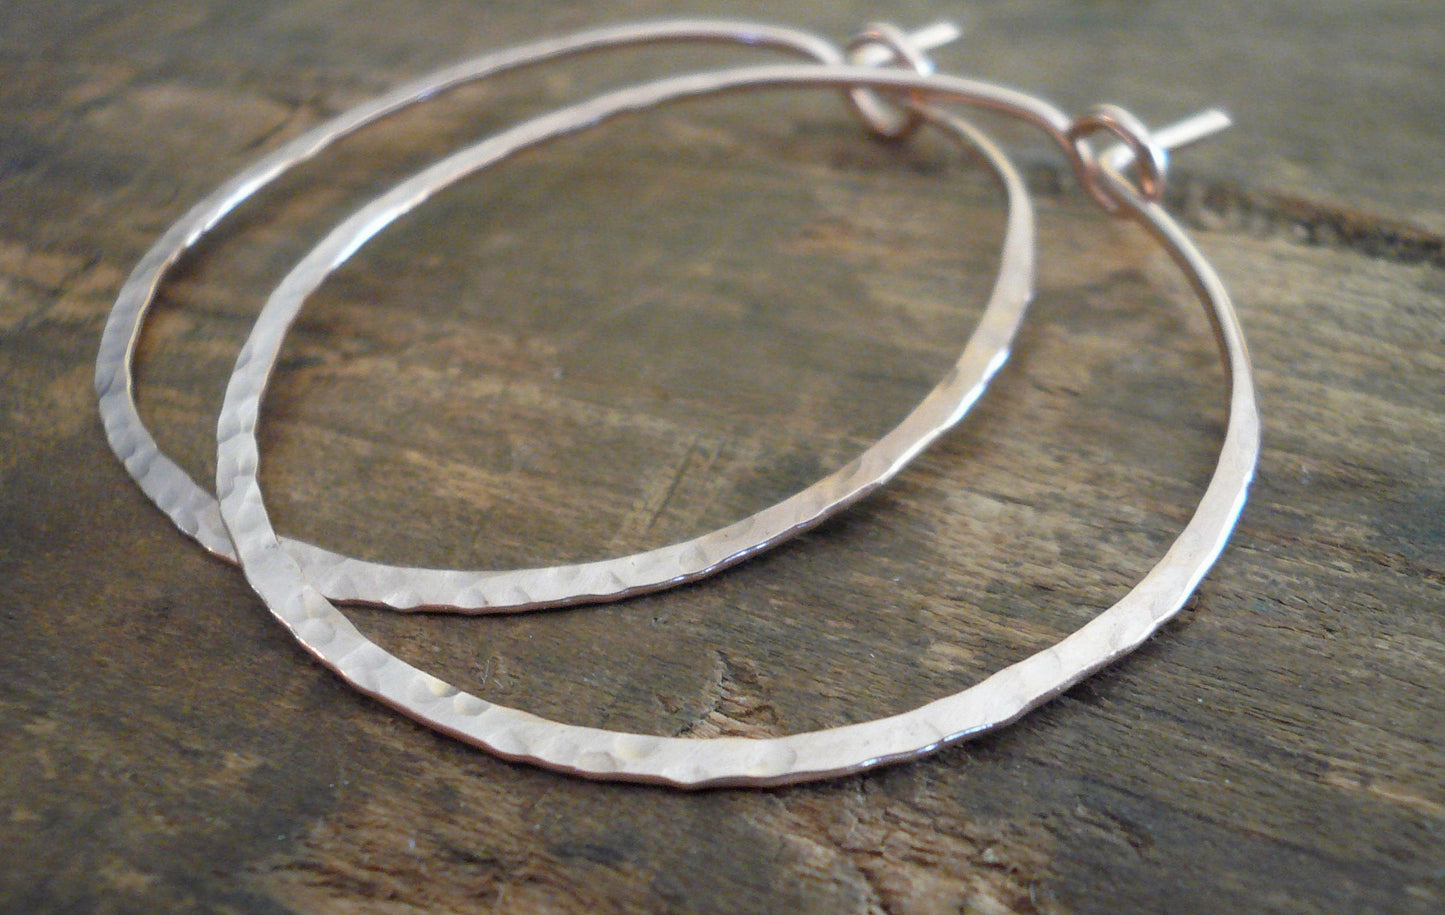 Mangly Hoops in Rose Gold - Choice of 6 sizes. Handmade. Hammered. 14k Rose goldfill hoops